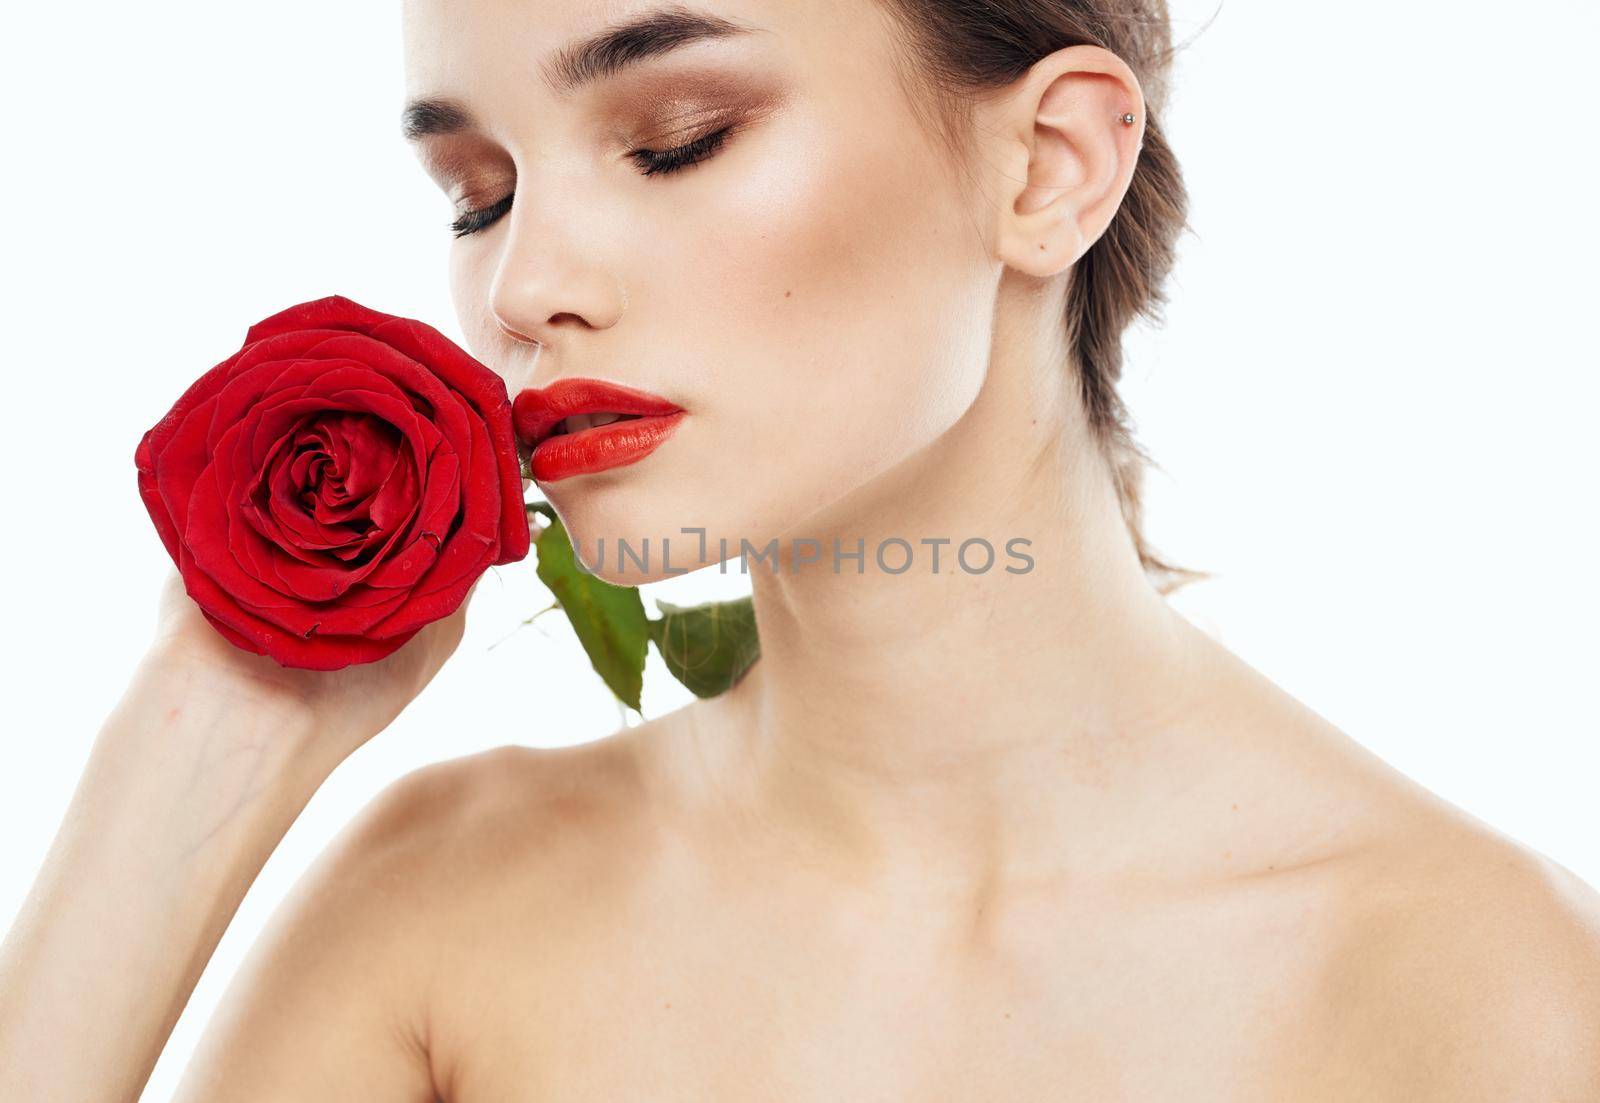 Attractive woman model with bared shoulders and a flower emotion charm. High quality photo